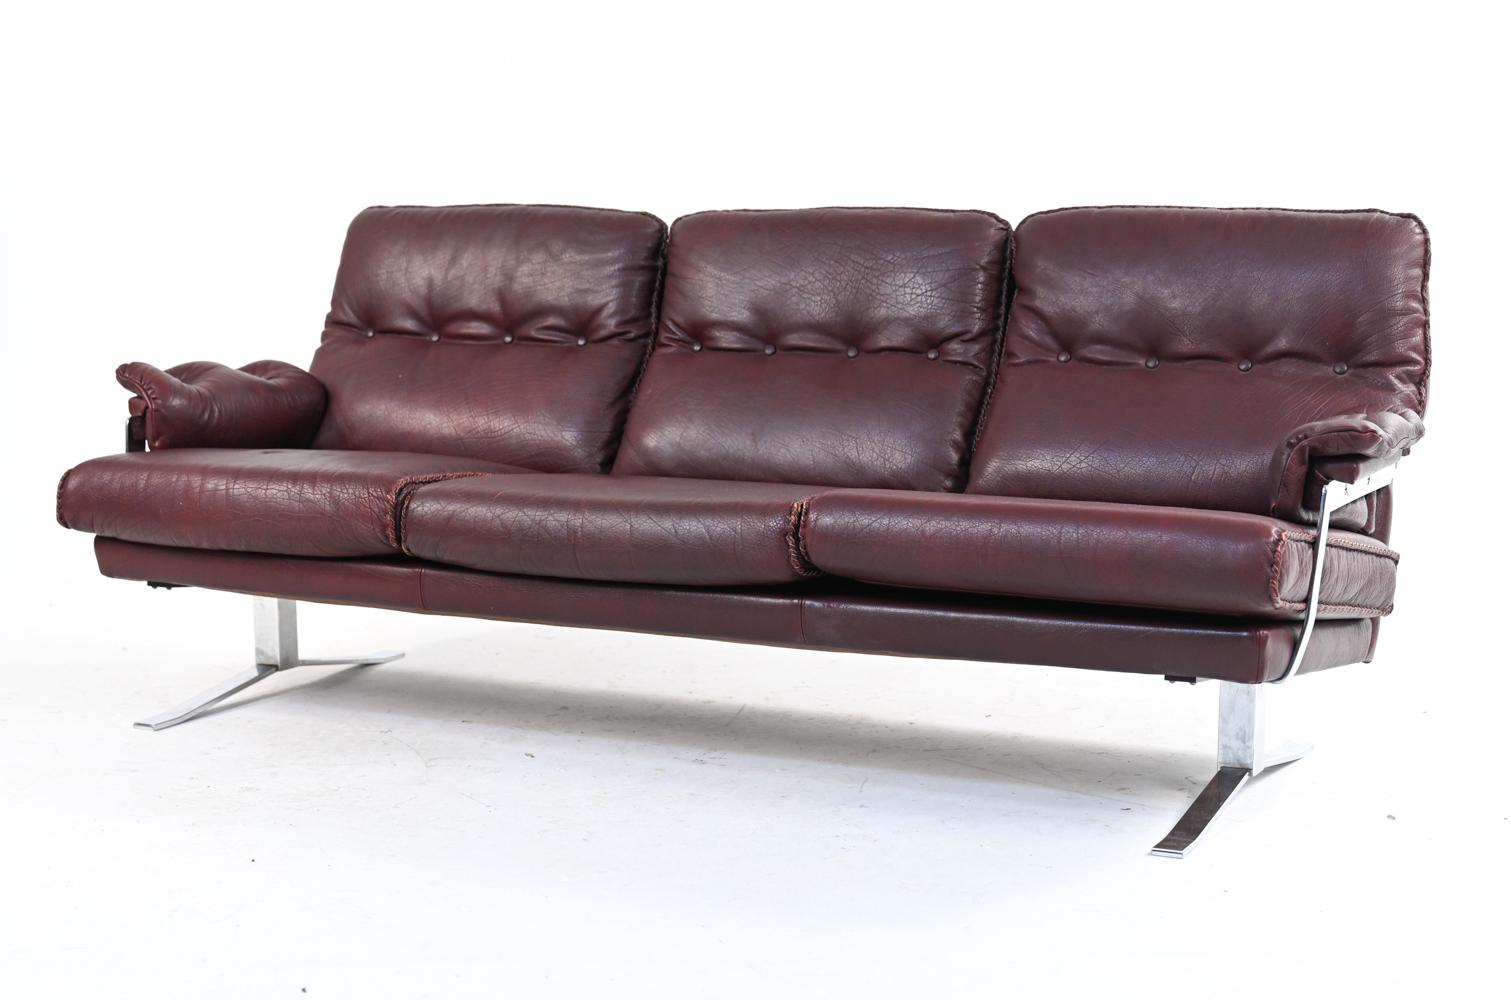 20th Century Arne Norell Chrome & Buffalo Leather Sofa Suite, c. 1960's